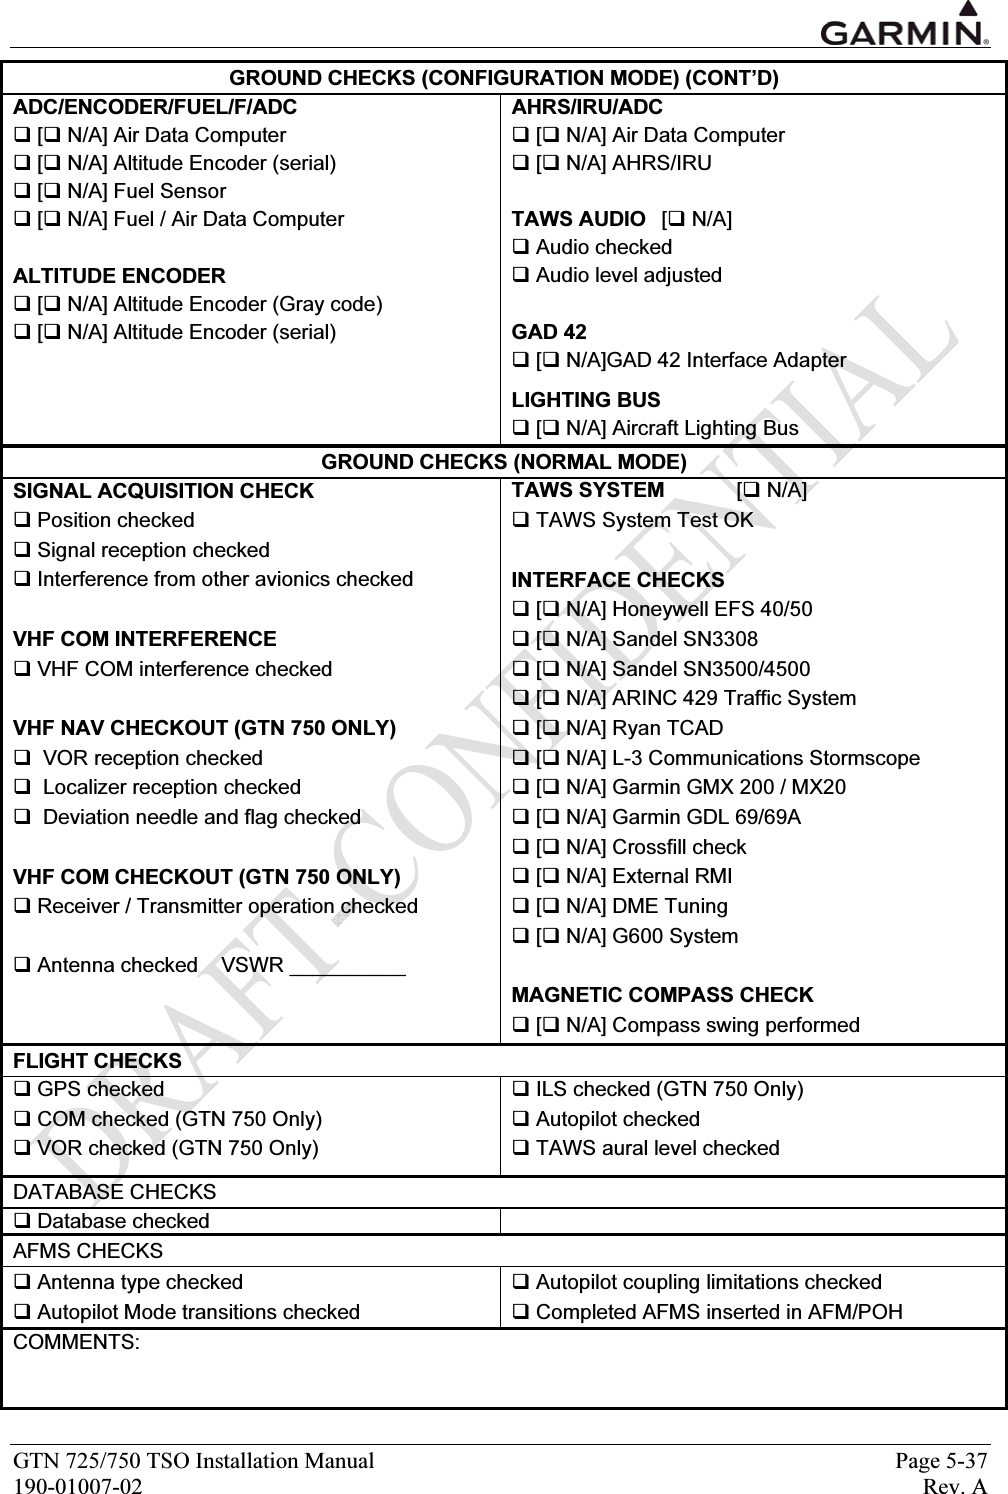  GTN 725/750 TSO Installation Manual  Page 5-37 190-01007-02  Rev. A GROUND CHECKS (CONFIGURATION MODE) (CONT’D) ADC/ENCODER/FUEL/F/ADC AHRS/IRU/ADC  [ N/A] Air Data Computer   [ N/A] Air Data Computer  [ N/A] Altitude Encoder (serial)   [ N/A] AHRS/IRU   [ N/A] Fuel Sensor    [ N/A] Fuel / Air Data Computer  TAWS AUDIO   [ N/A]   Audio checked ALTITUDE ENCODER   Audio level adjusted  [ N/A] Altitude Encoder (Gray code)    [ N/A] Altitude Encoder (serial)  GAD 42   [ N/A]GAD 42 Interface Adapter     LIGHTING BUS   [ N/A] Aircraft Lighting Bus GROUND CHECKS (NORMAL MODE) SIGNAL ACQUISITION CHECK  TAWS SYSTEM [ N/A]  Position checked   TAWS System Test OK  Signal reception checked    Interference from other avionics checked  INTERFACE CHECKS     [ N/A] Honeywell EFS 40/50 VHF COM INTERFERENCE   [ N/A] Sandel SN3308  VHF COM interference checked   [ N/A] Sandel SN3500/4500   [ N/A] ARINC 429 Traffic System VHF NAV CHECKOUT (GTN 750 ONLY)   [ N/A] Ryan TCAD   VOR reception checked   [ N/A] L-3 Communications Stormscope   Localizer reception checked   [ N/A] Garmin GMX 200 / MX20   Deviation needle and flag checked   [ N/A] Garmin GDL 69/69A   [ N/A] Crossfill check VHF COM CHECKOUT (GTN 750 ONLY)   [ N/A] External RMI   Receiver / Transmitter operation checked   [ N/A] DME Tuning   [ N/A] G600 System  Antenna checked    VSWR __________    MAGNETIC COMPASS CHECK   [ N/A] Compass swing performed FLIGHT CHECKS  GPS checked   ILS checked (GTN 750 Only)  COM checked (GTN 750 Only)   Autopilot checked  VOR checked (GTN 750 Only)   TAWS aural level checked    DATABASE CHECKS  Database checked   AFMS CHECKS  Antenna type checked   Autopilot coupling limitations checked  Autopilot Mode transitions checked   Completed AFMS inserted in AFM/POH COMMENTS:     